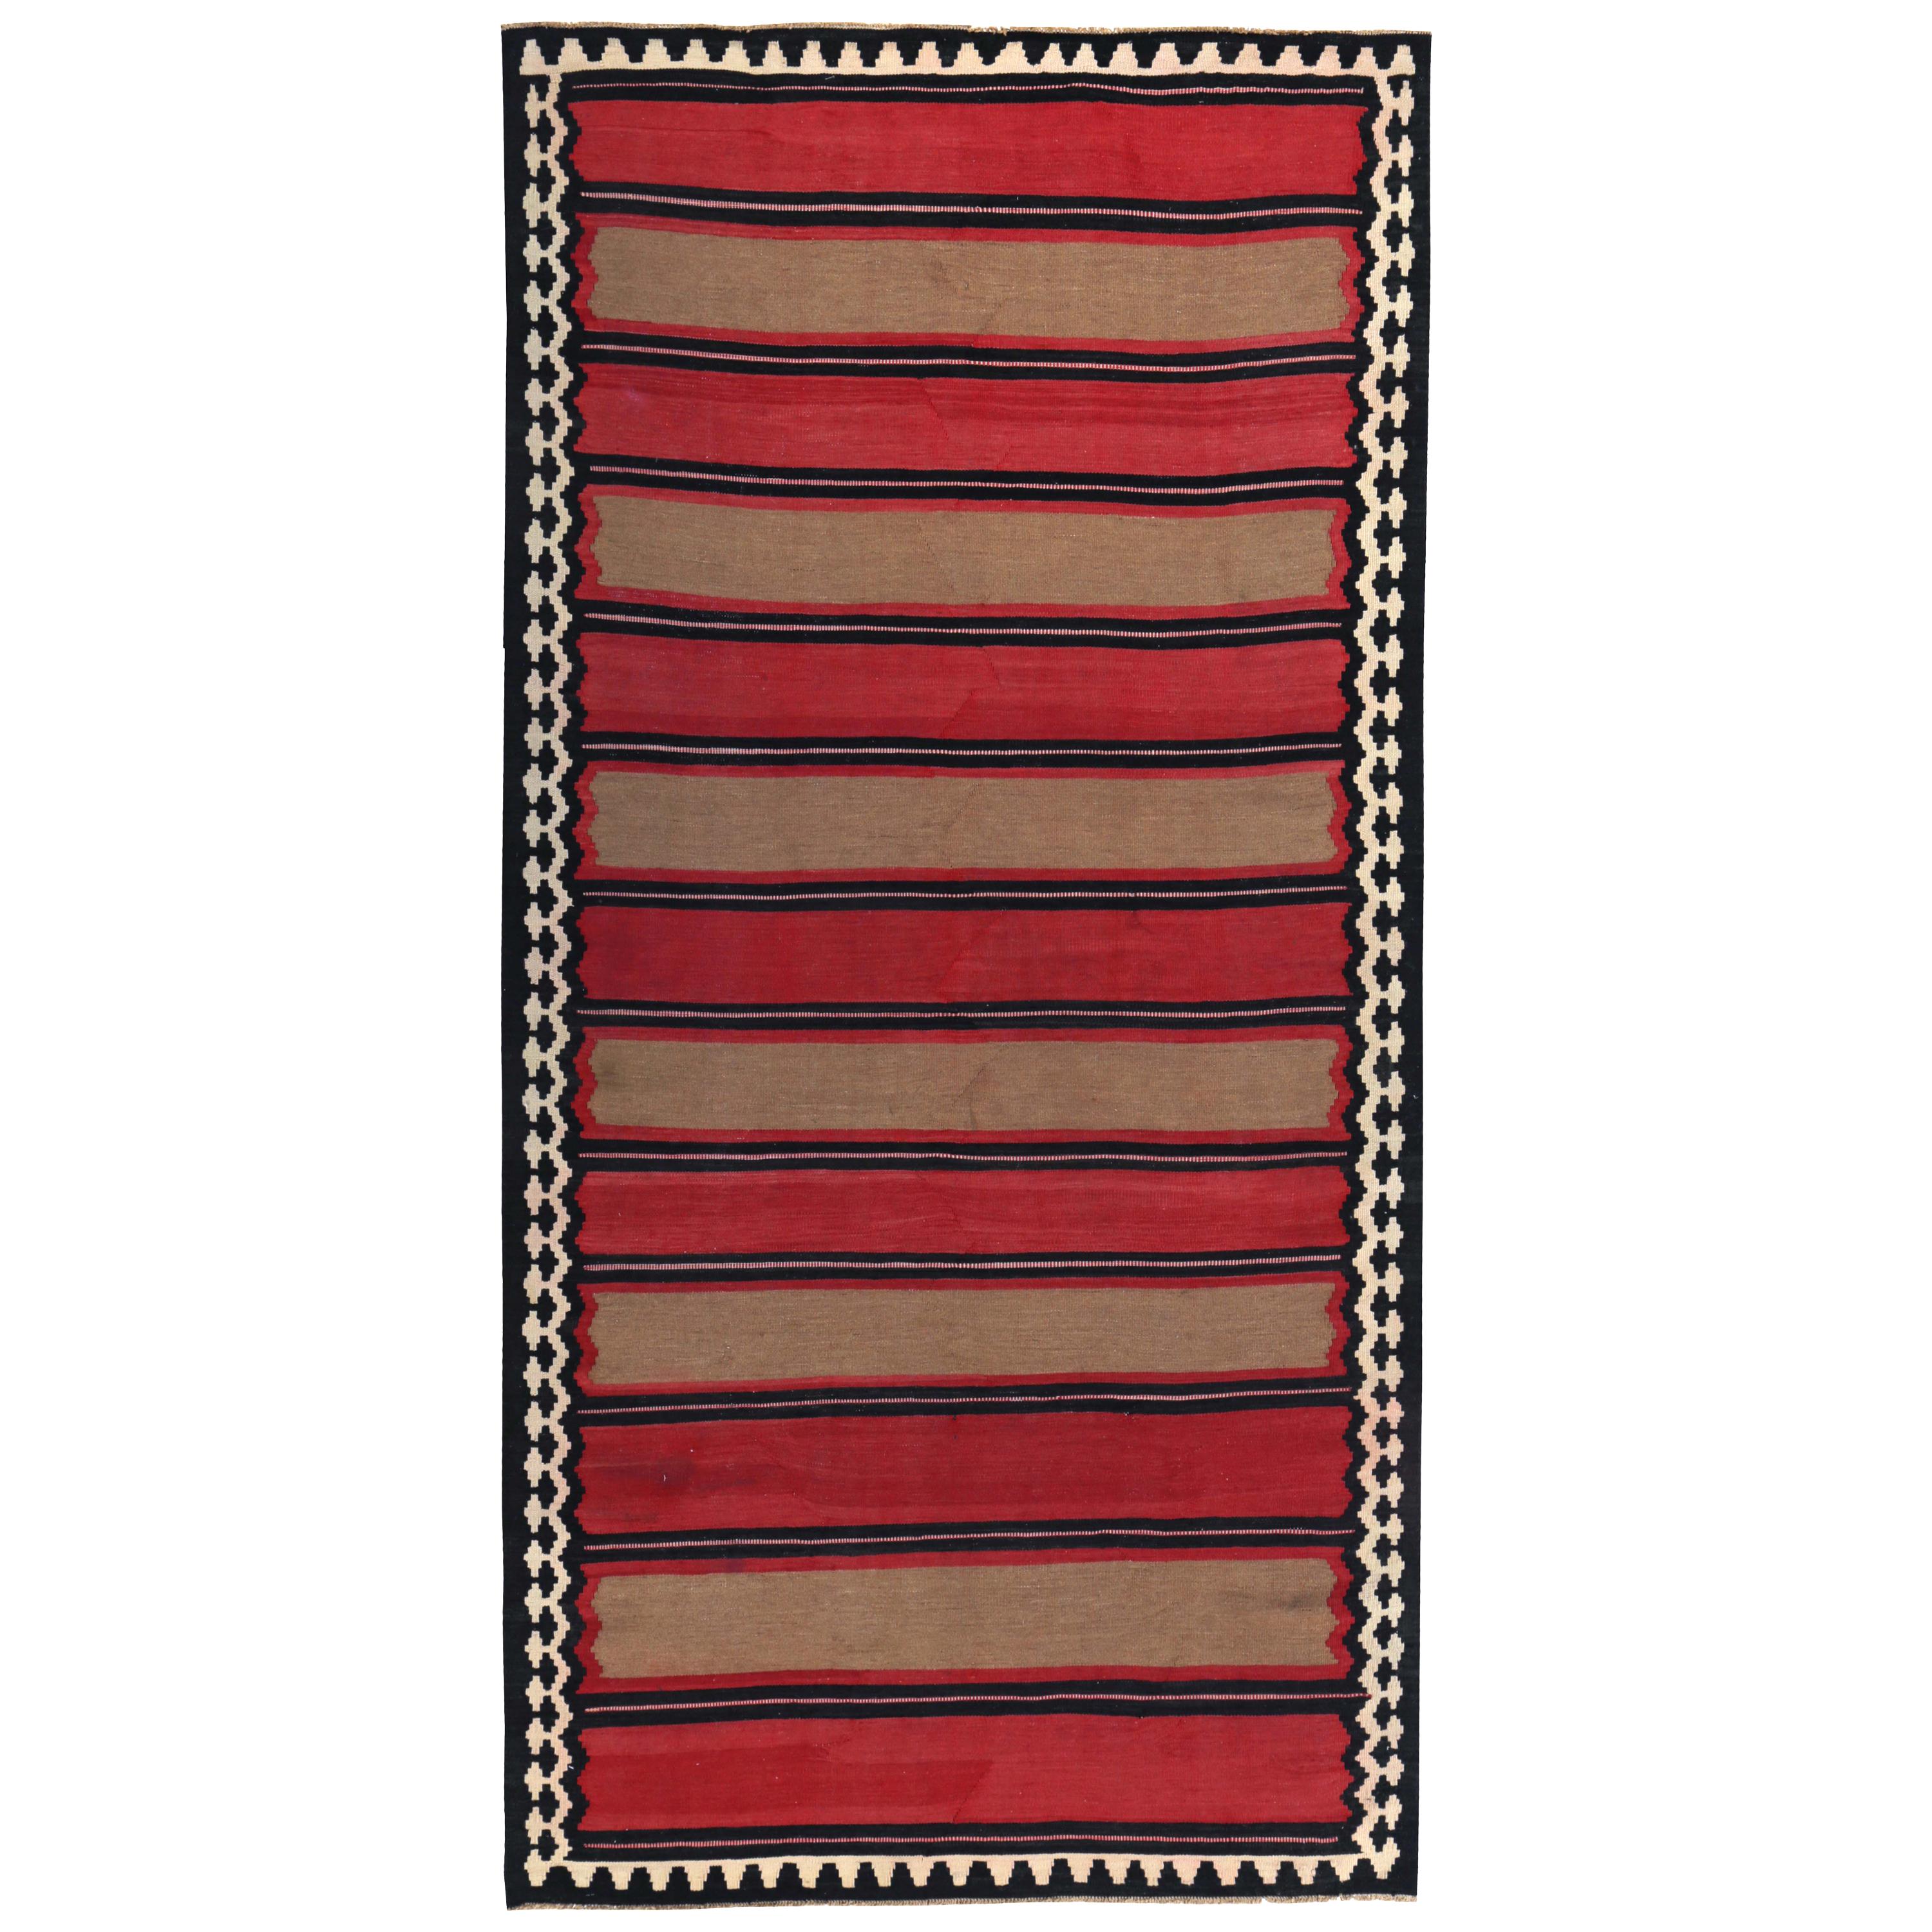 Modern Turkish Kilim Rug with Red and Brown and Block Stripes in a Black Field For Sale